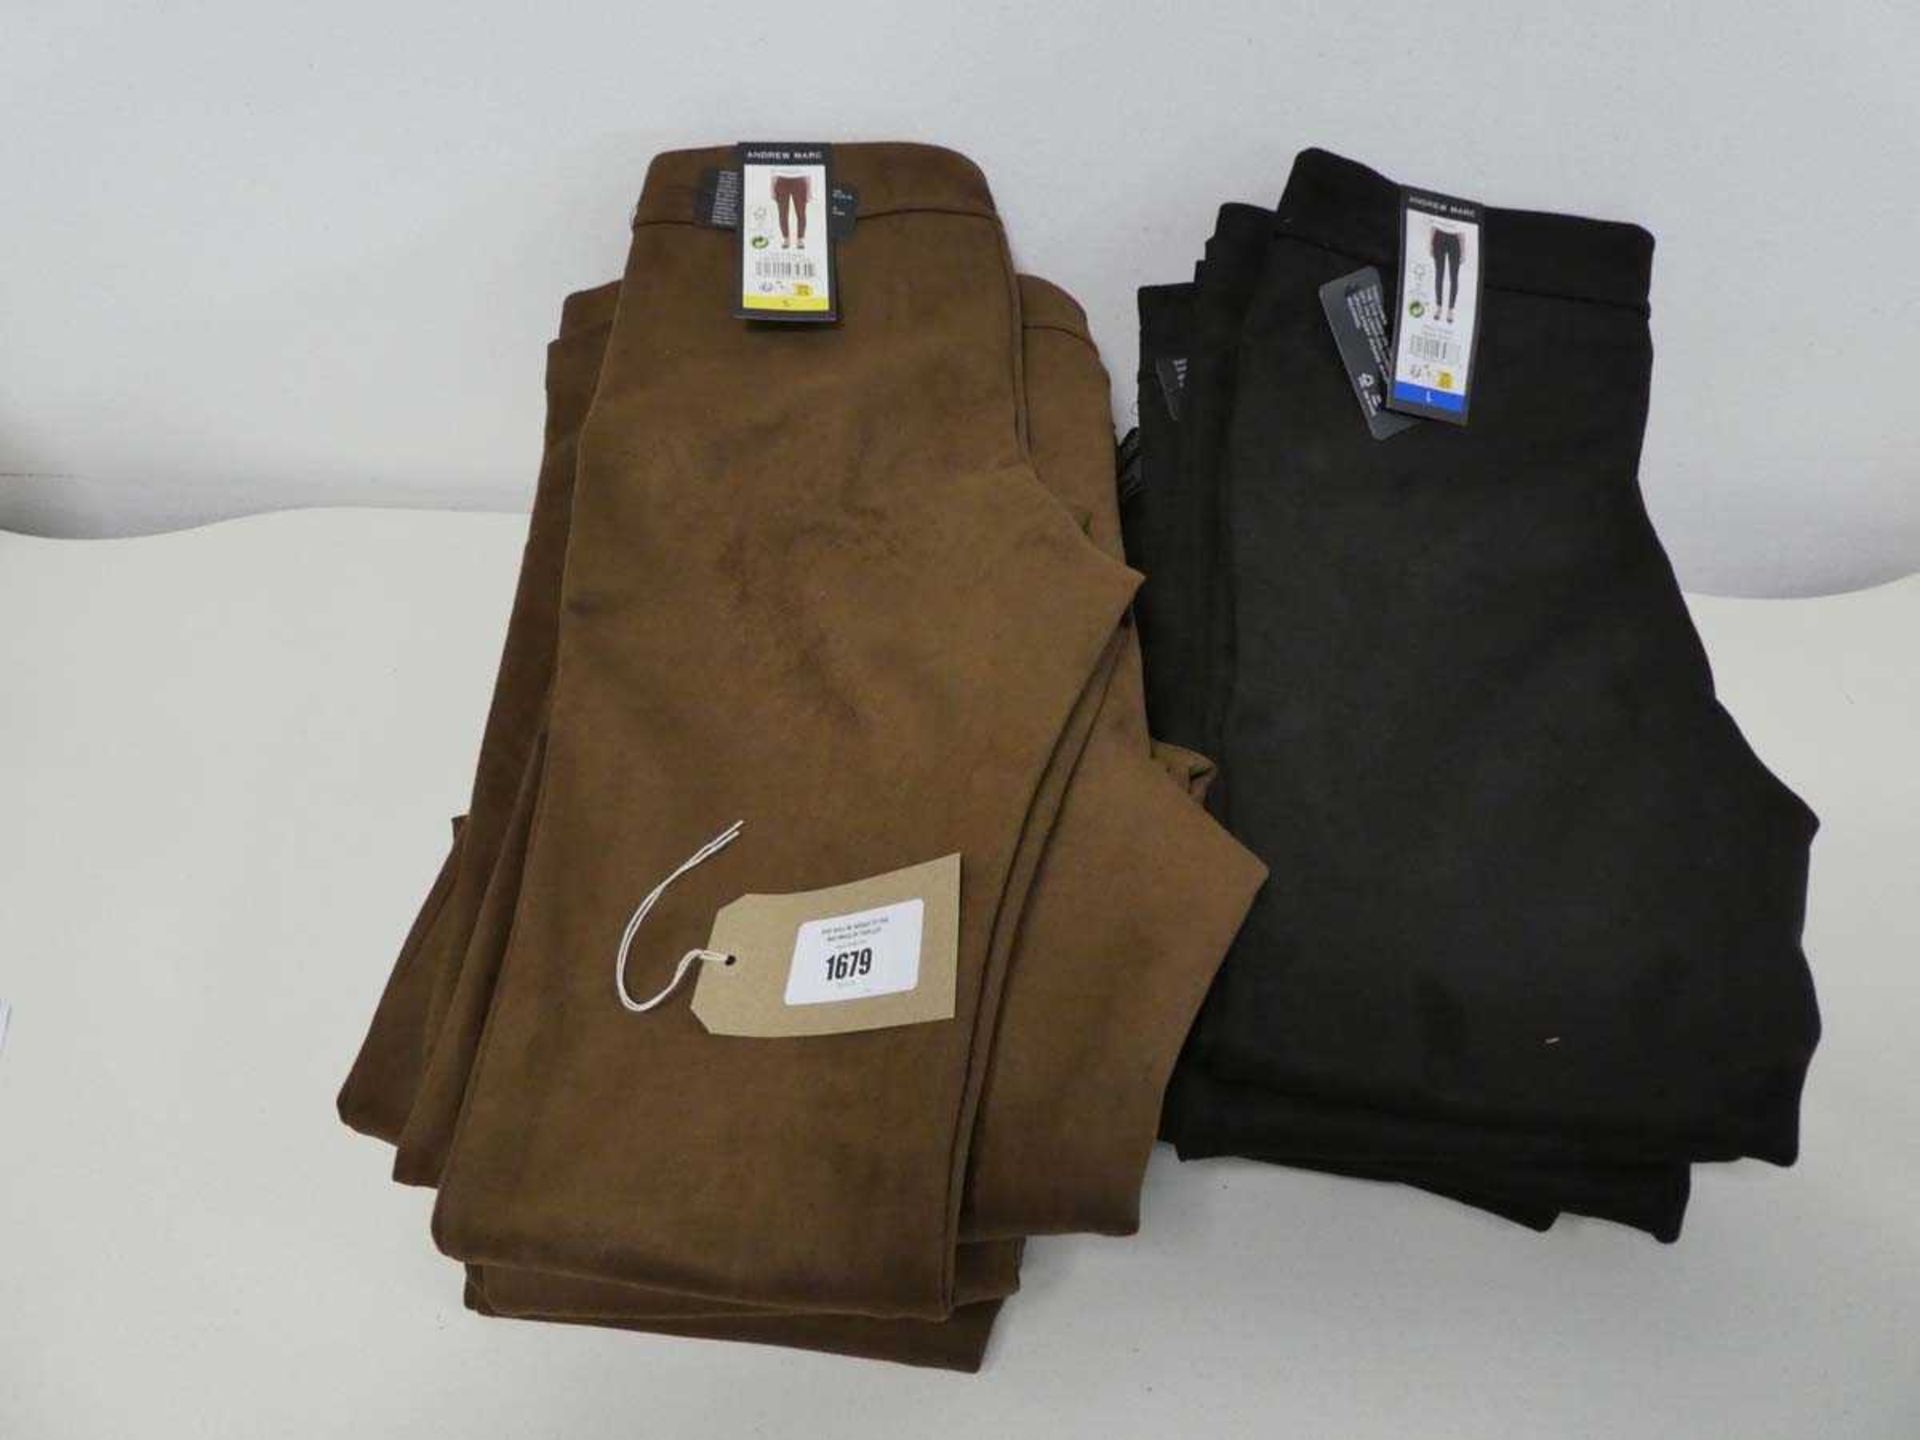 +VAT Approx. 20 pairs of womens trousers by Andrew Marc